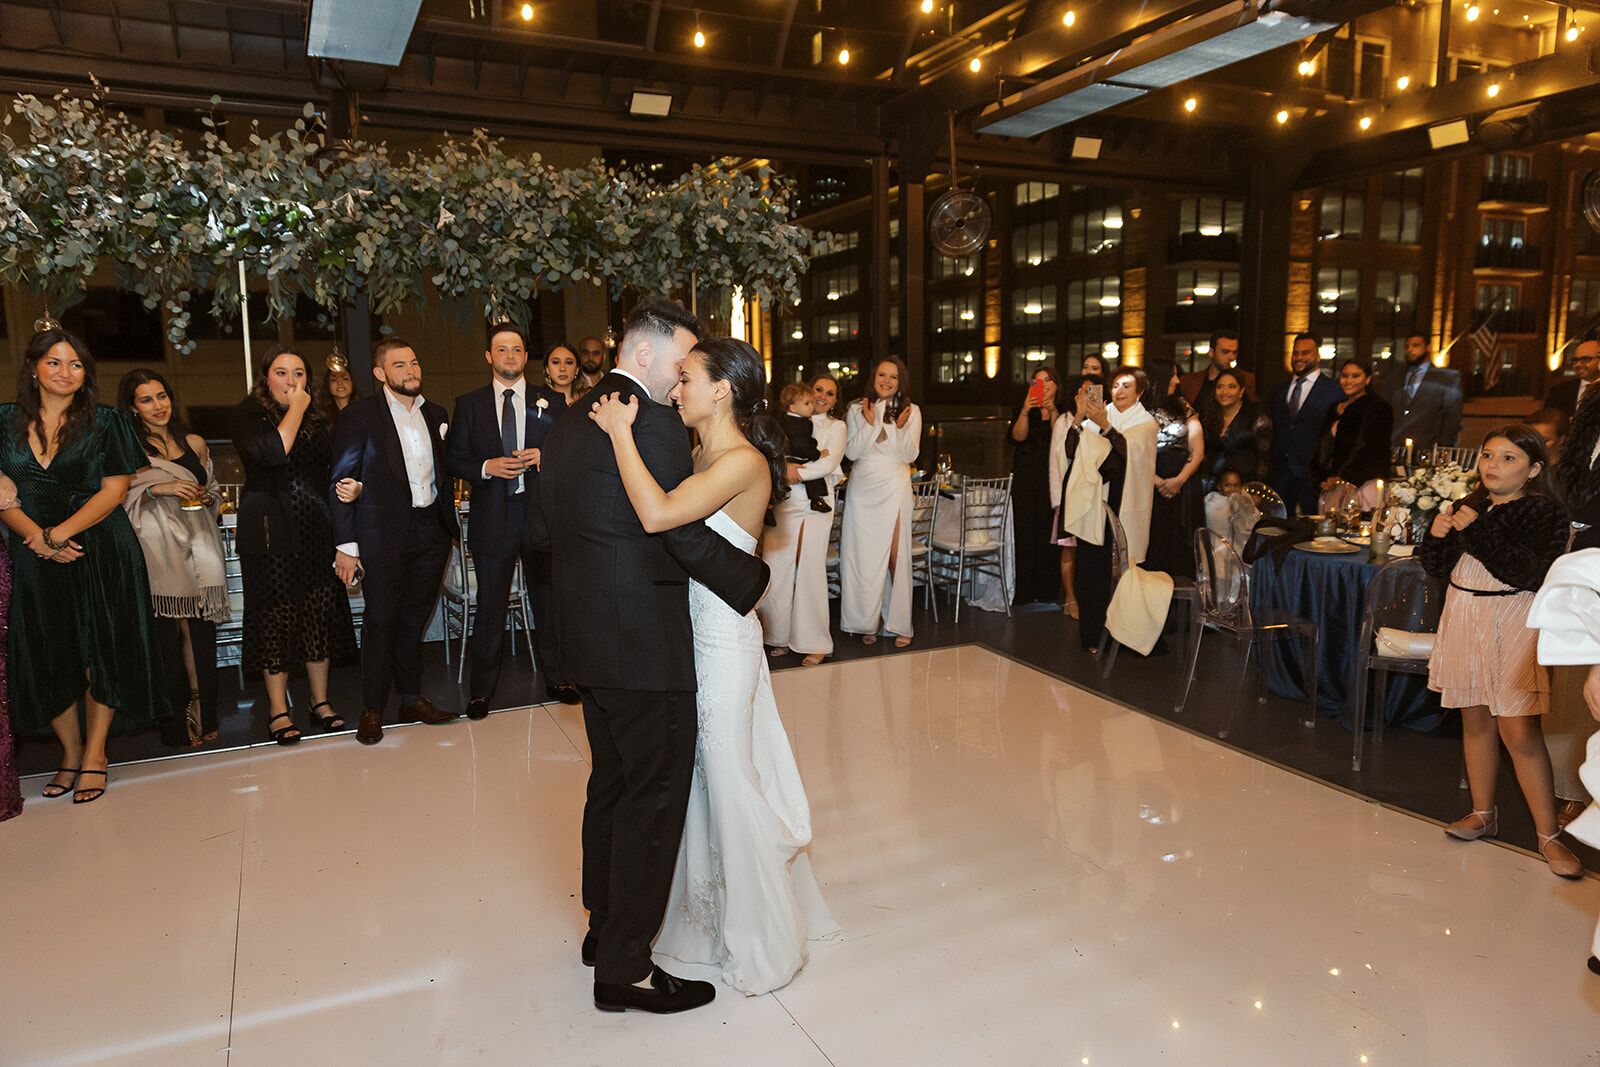 Fun and Family-Centered Wedding at The Riley Building in Austin